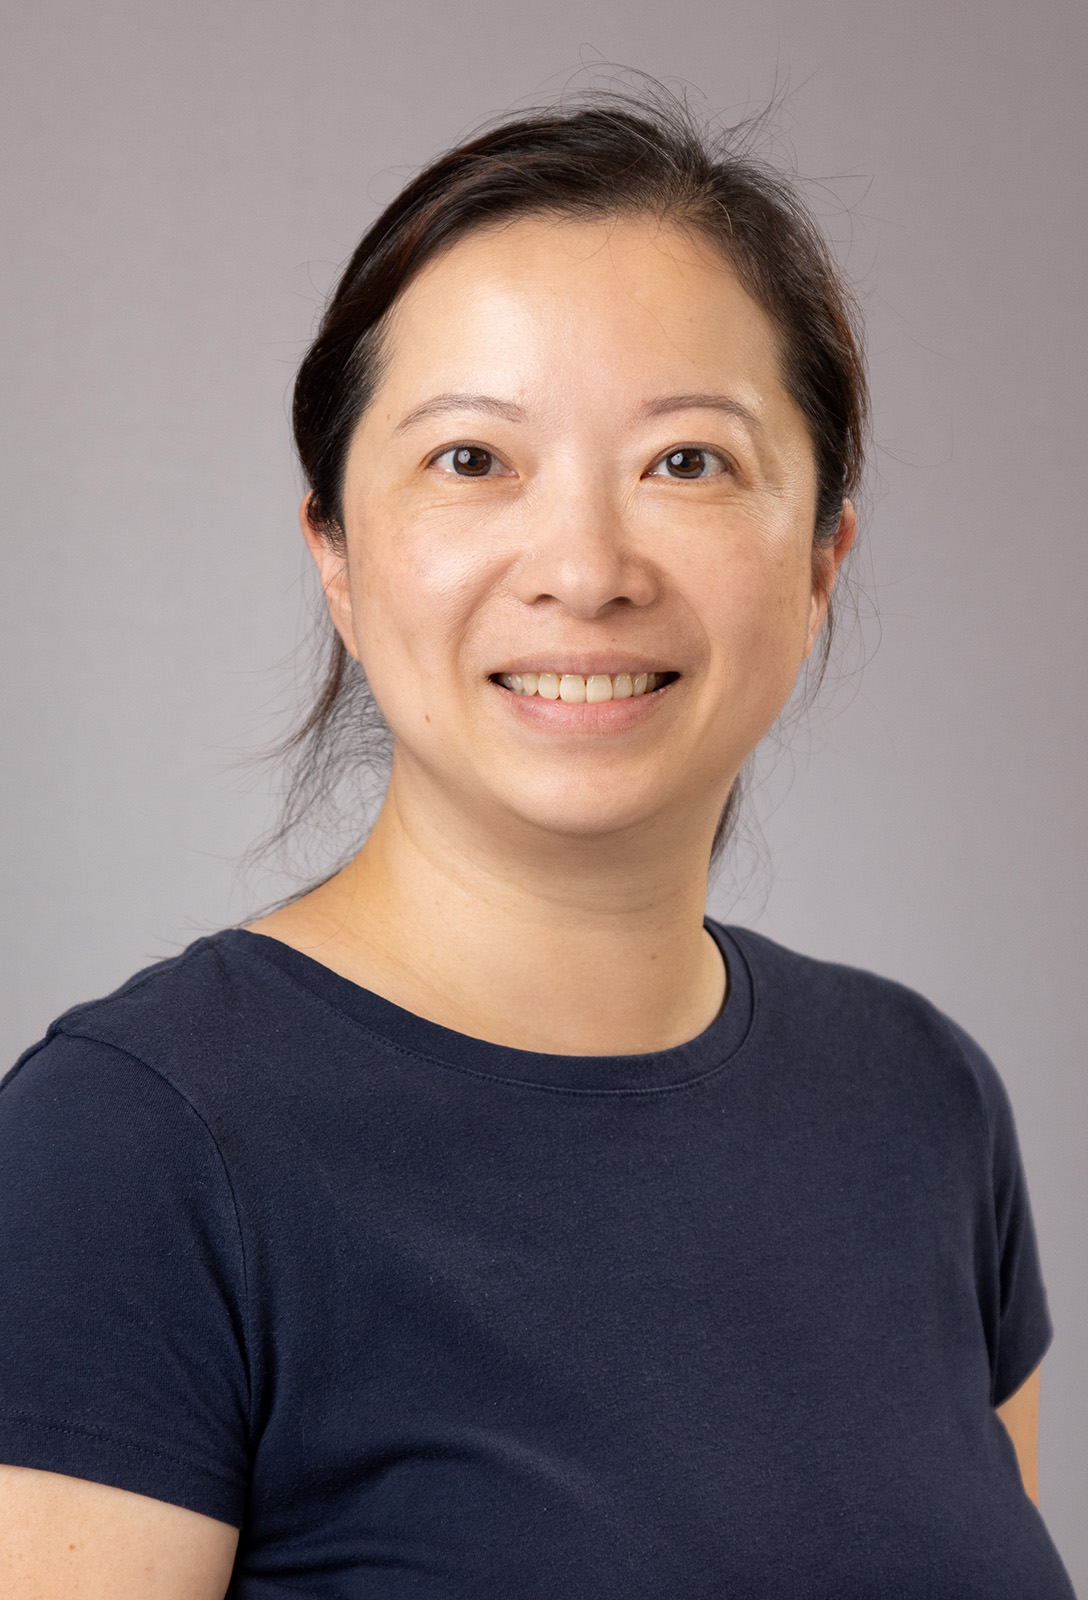 Qinyin Qiu from Department of Rehabilitation And Movement Sciences